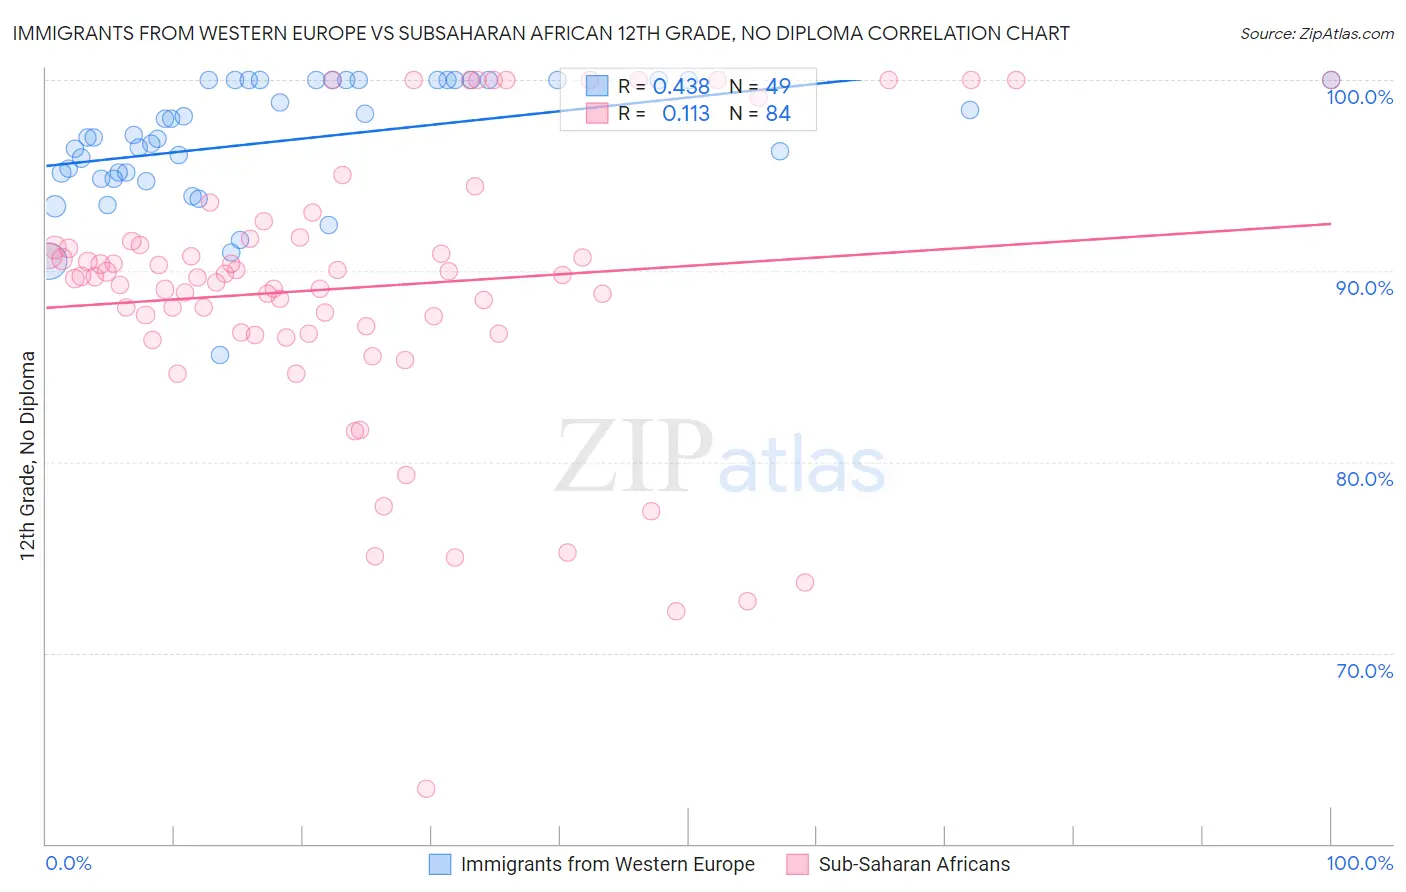 Immigrants from Western Europe vs Subsaharan African 12th Grade, No Diploma